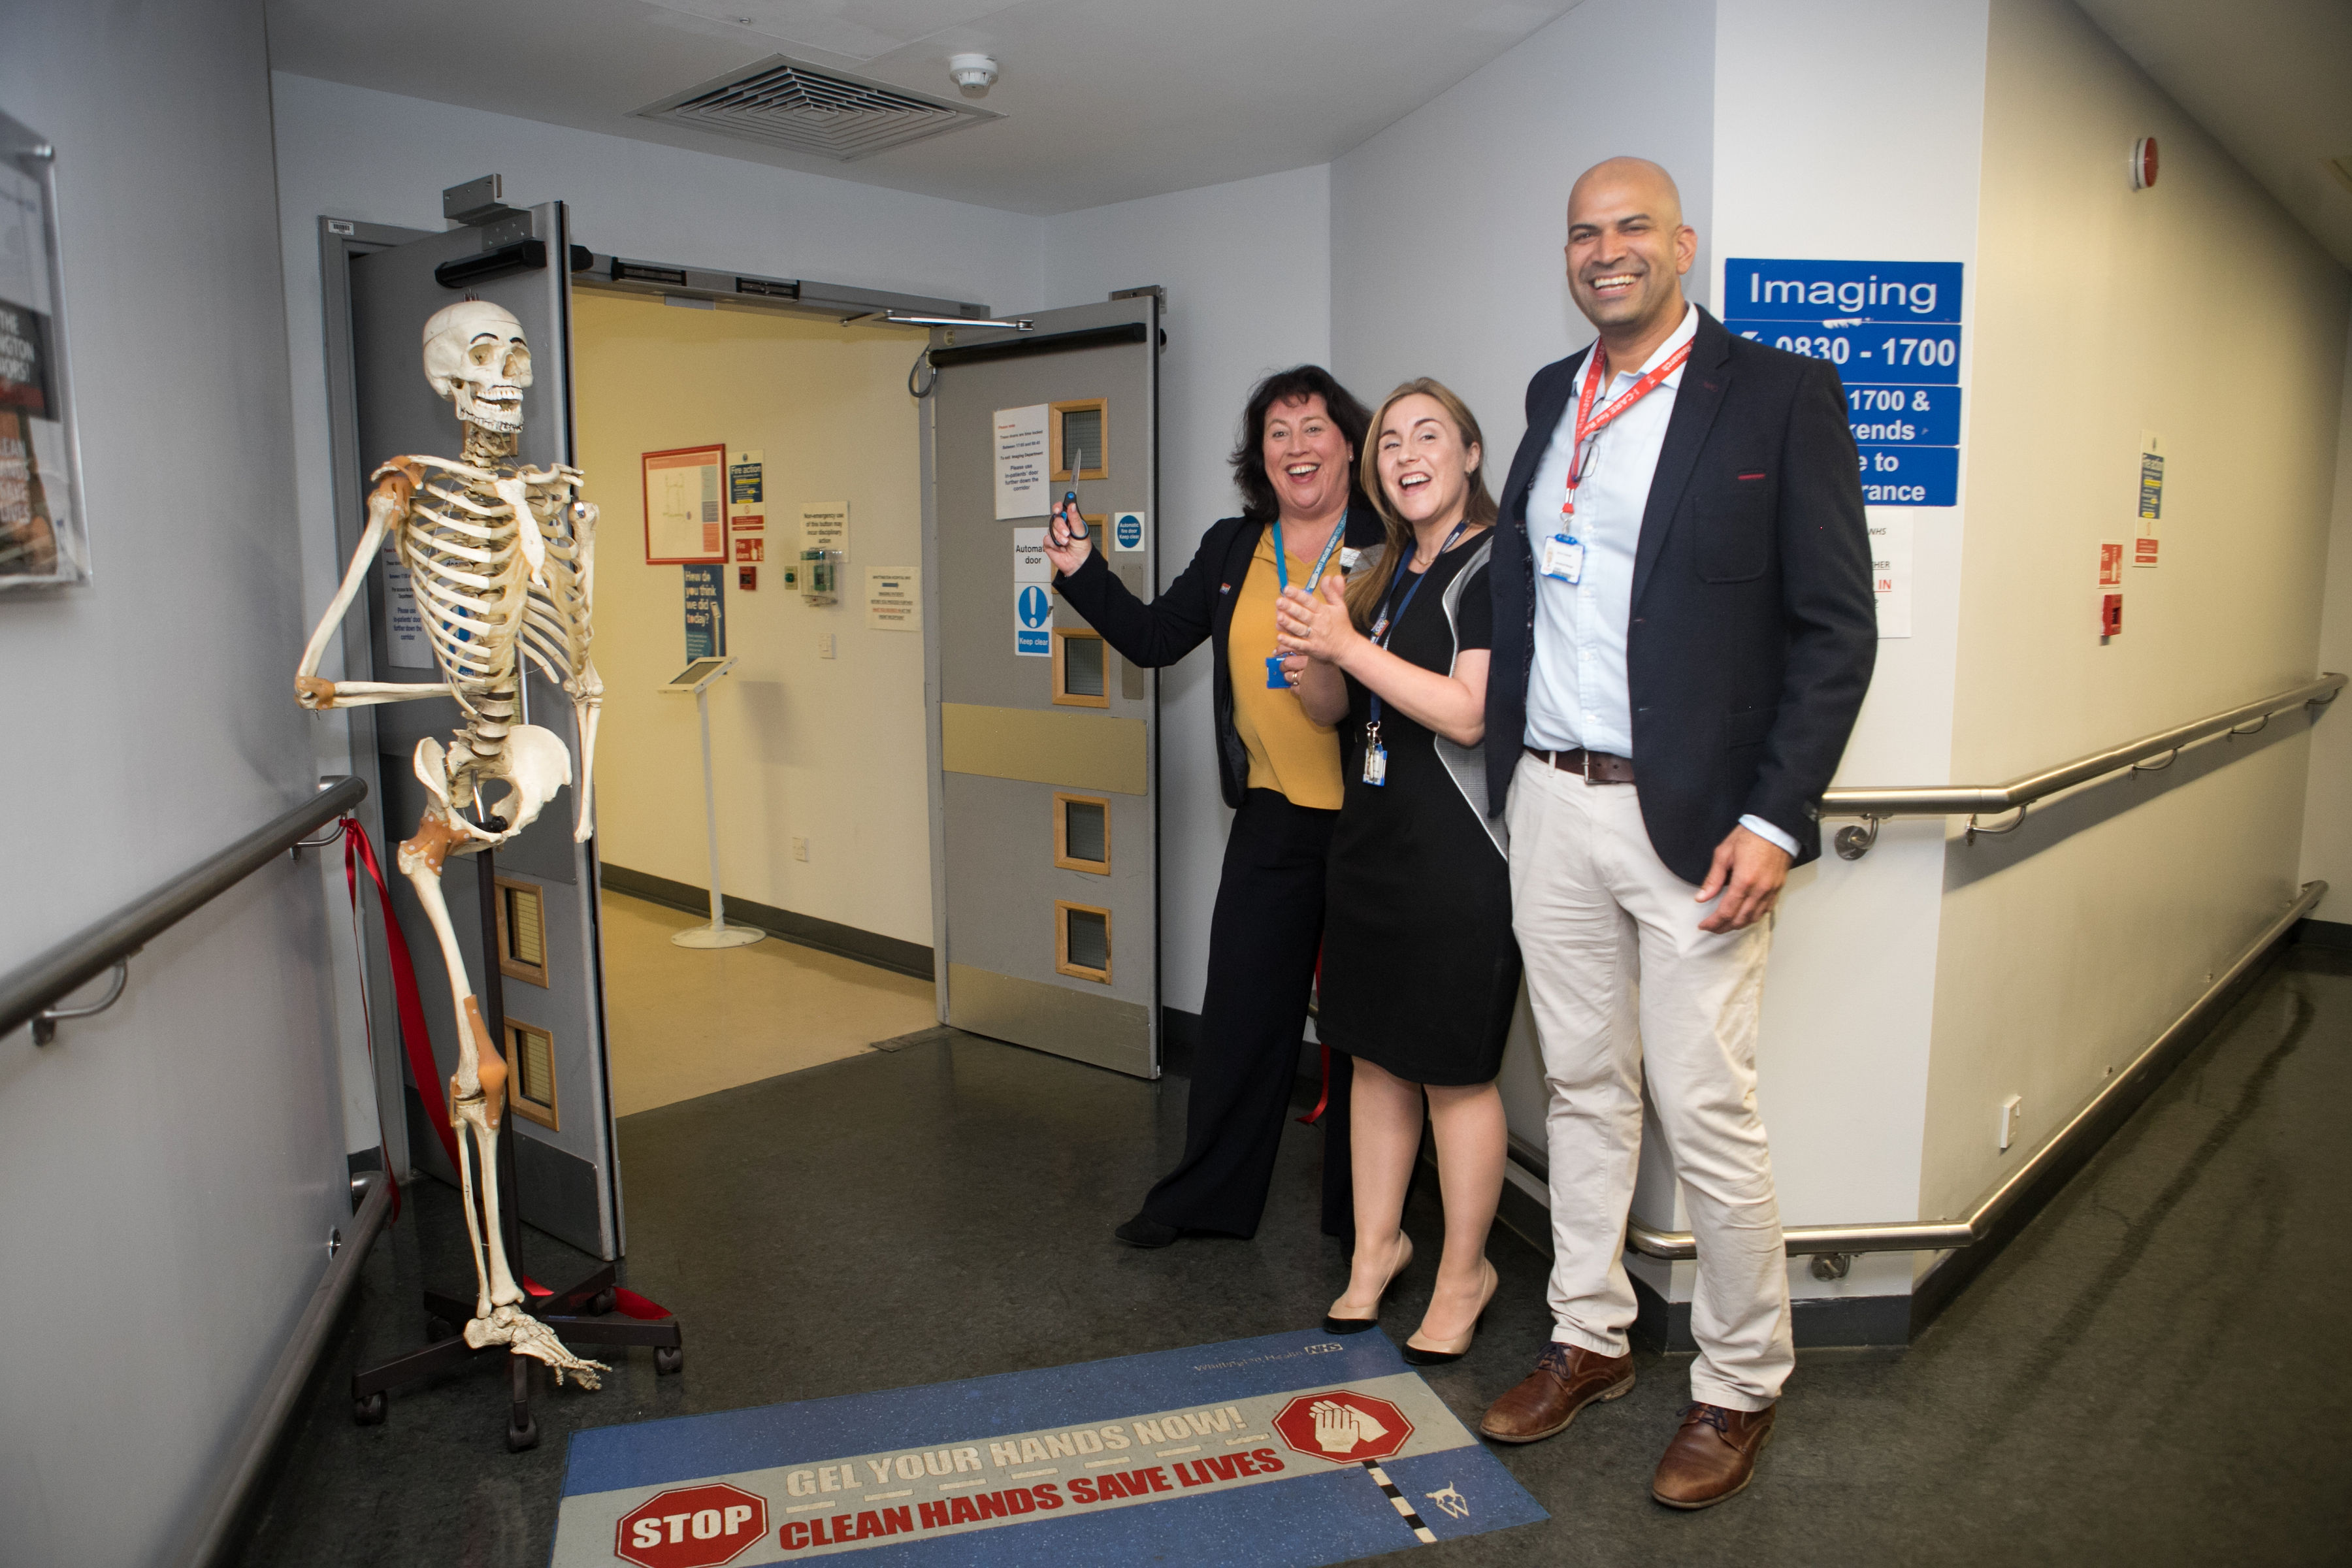 From left: Whittington Health chief executive, Siobhan Harrington; Cheryl Hill, imaging services manager; and Adrian Trinidade, operational manager for imaging cut the ribbon on the imaging suite which has undergone a £4m transformation